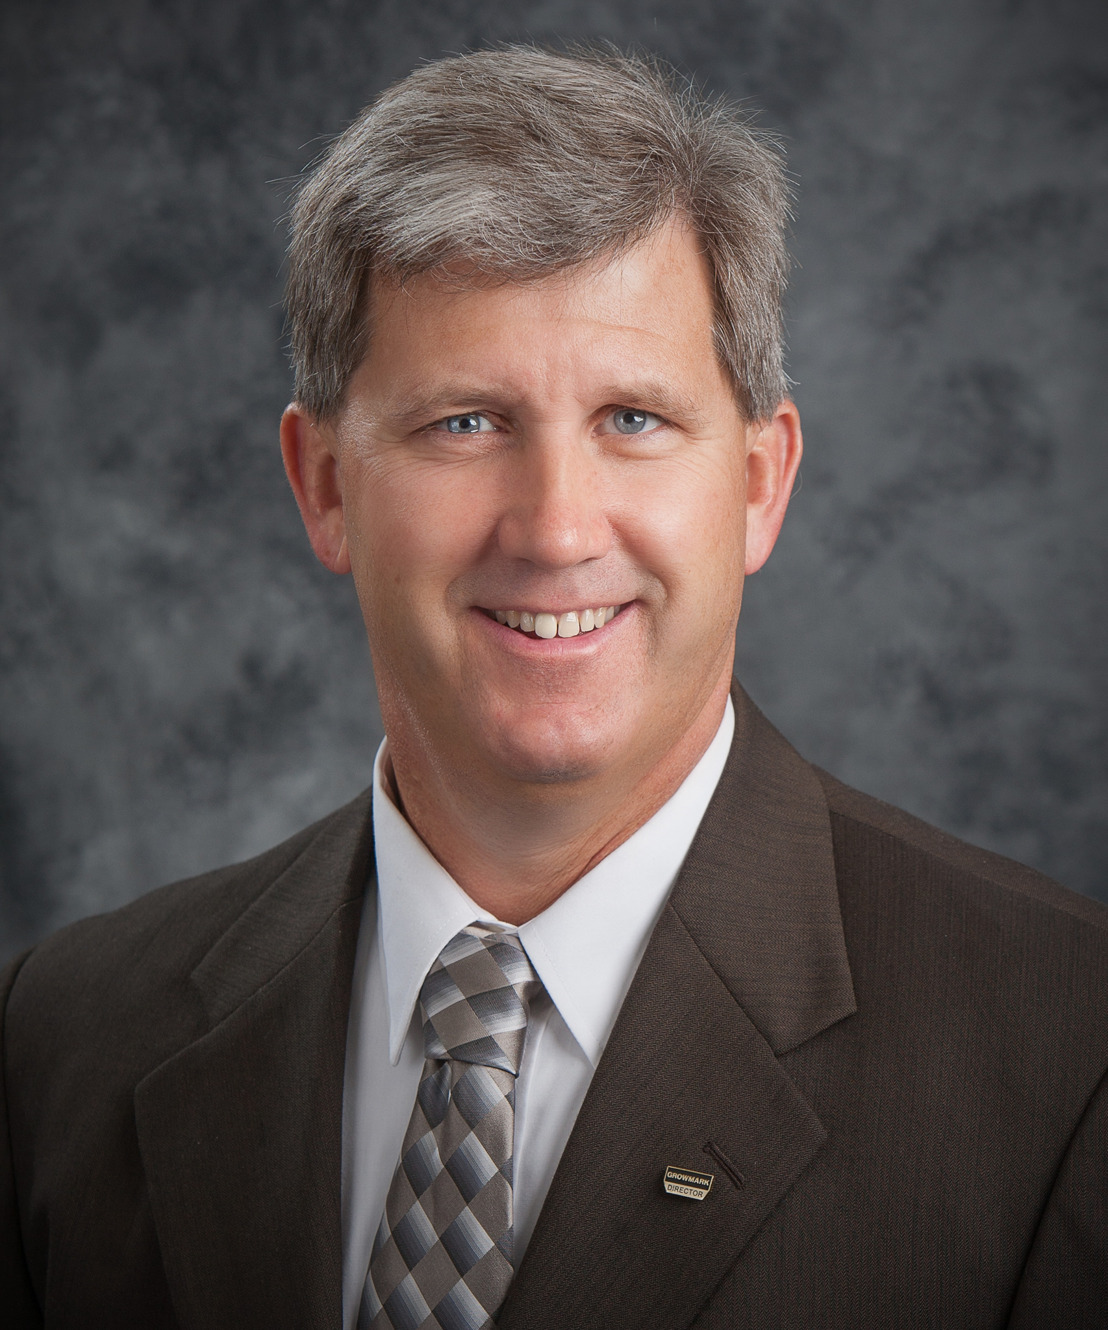 New Chairman Elected to Lead GROWMARK Board of Directors